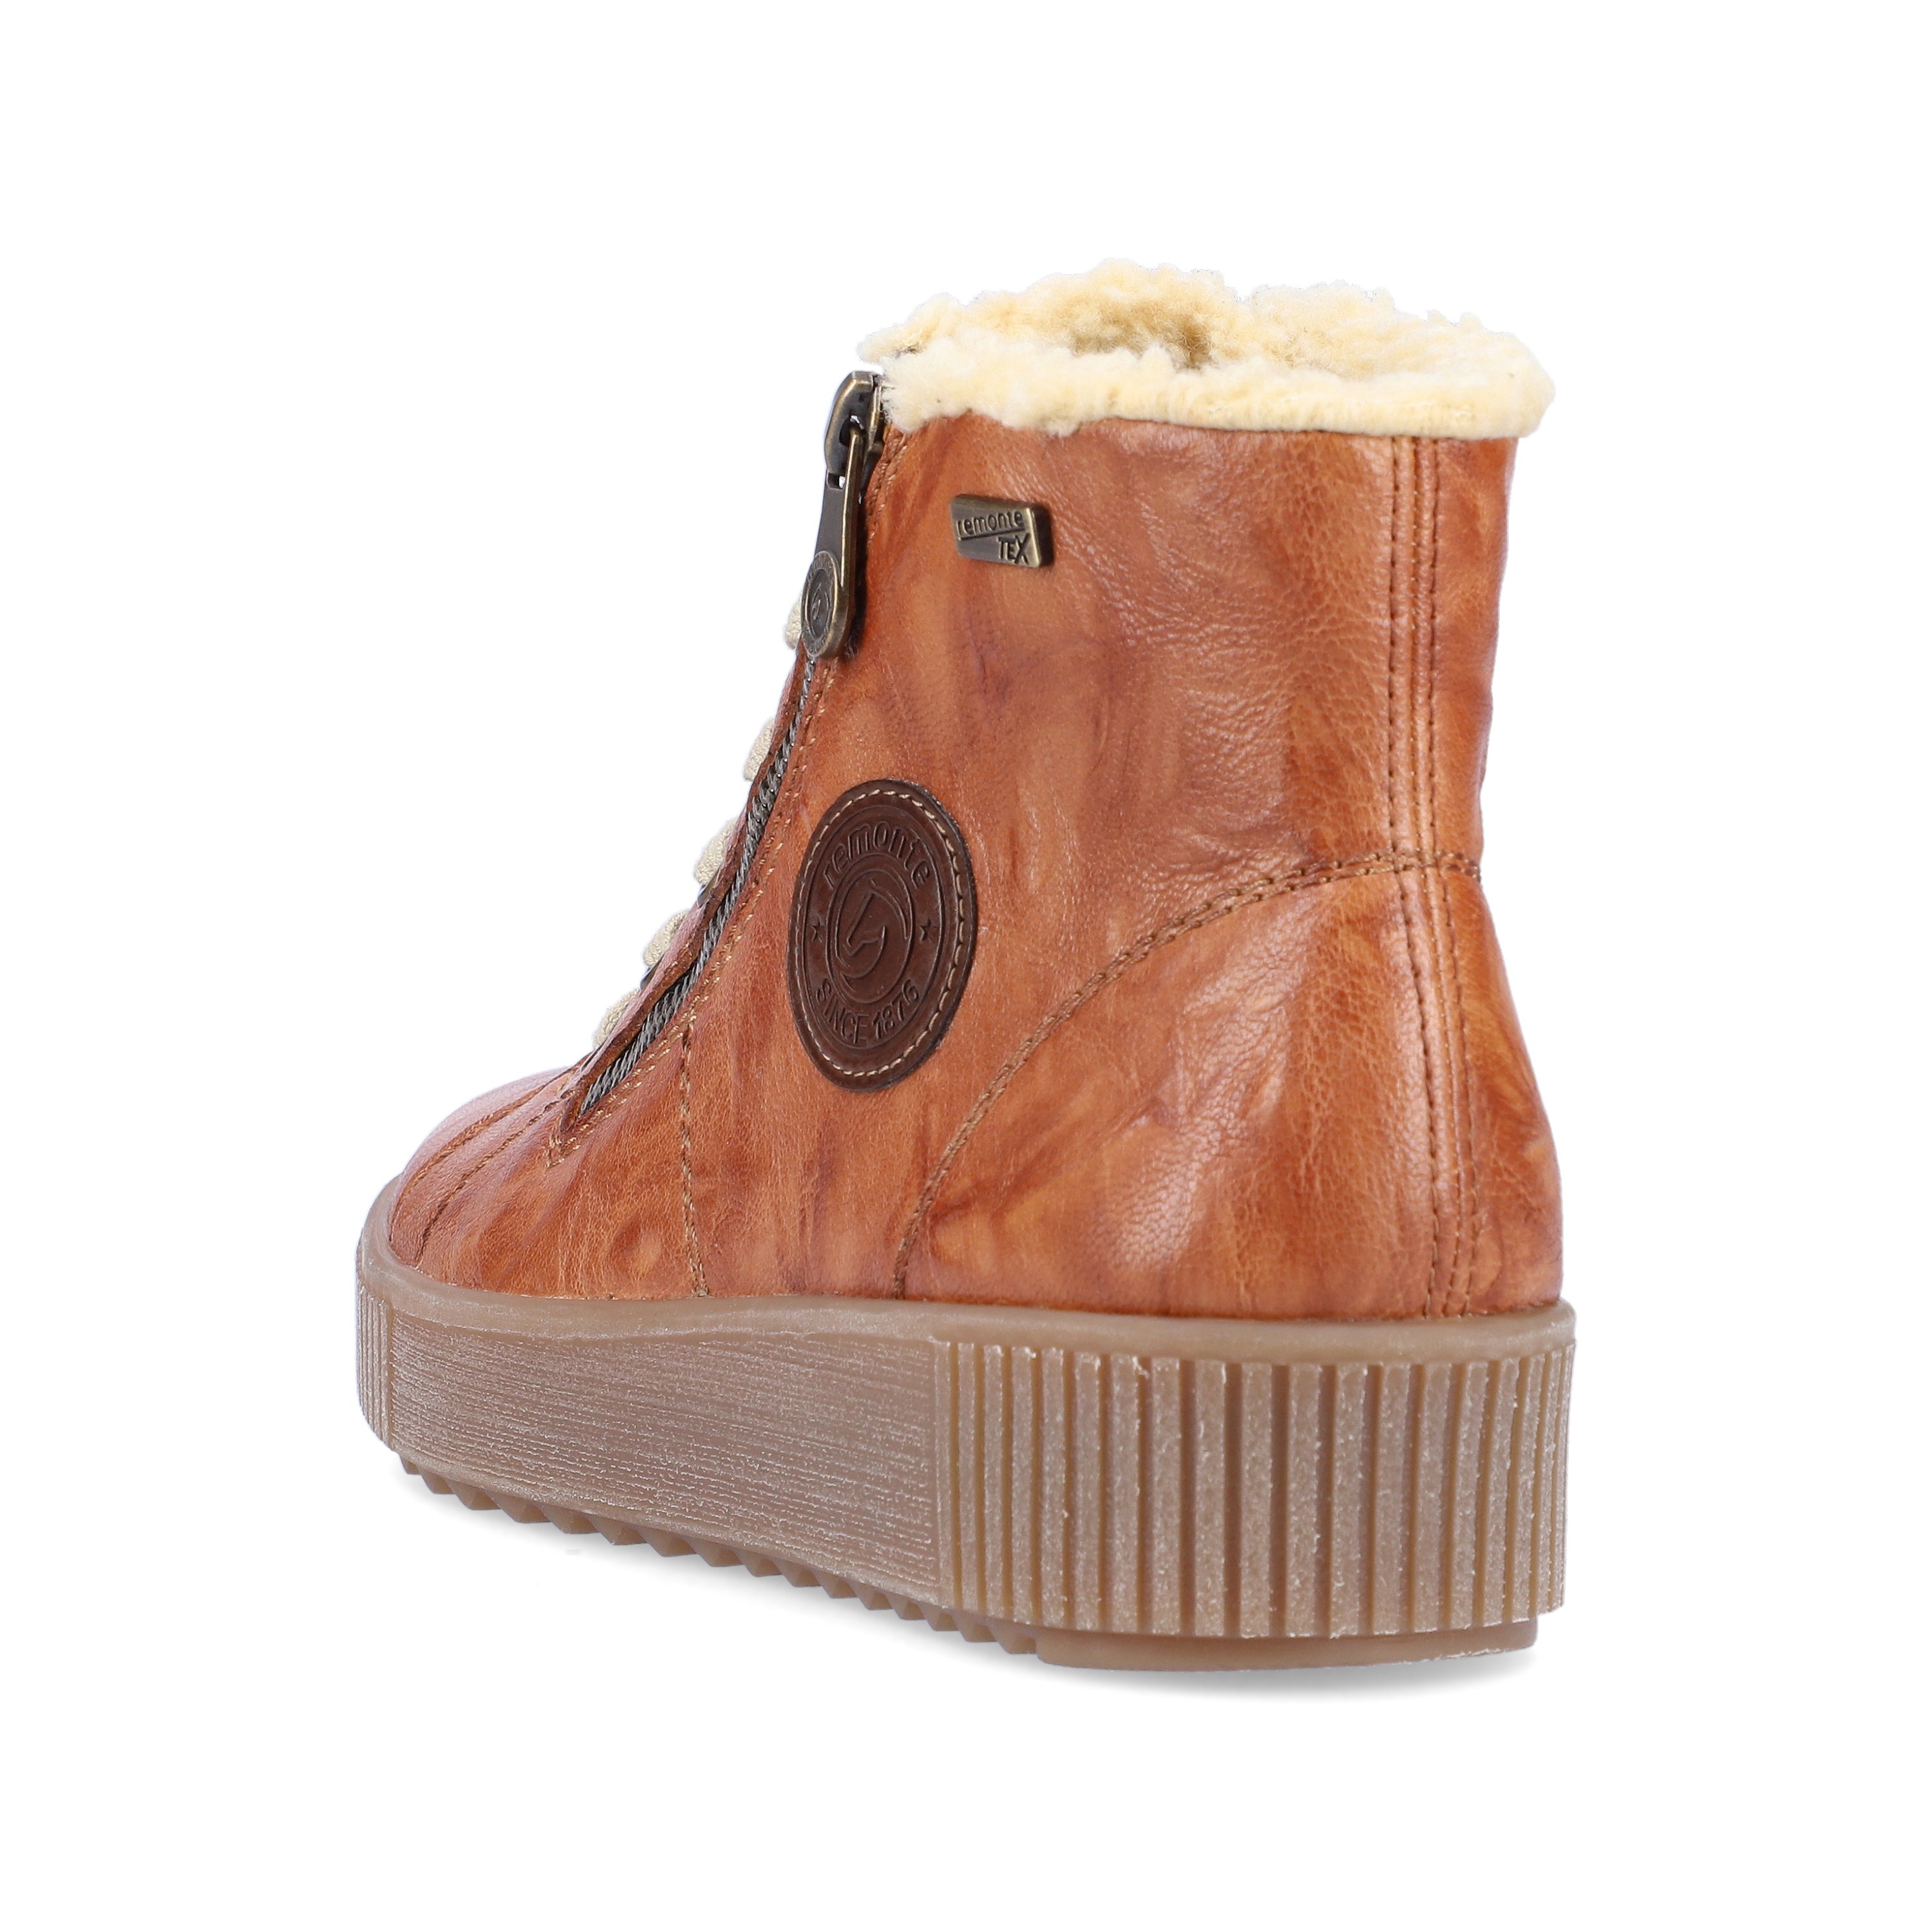 Wood brown remonte women´s lace-up boots R7980-23 with flexible platform sole. Shoe from the back